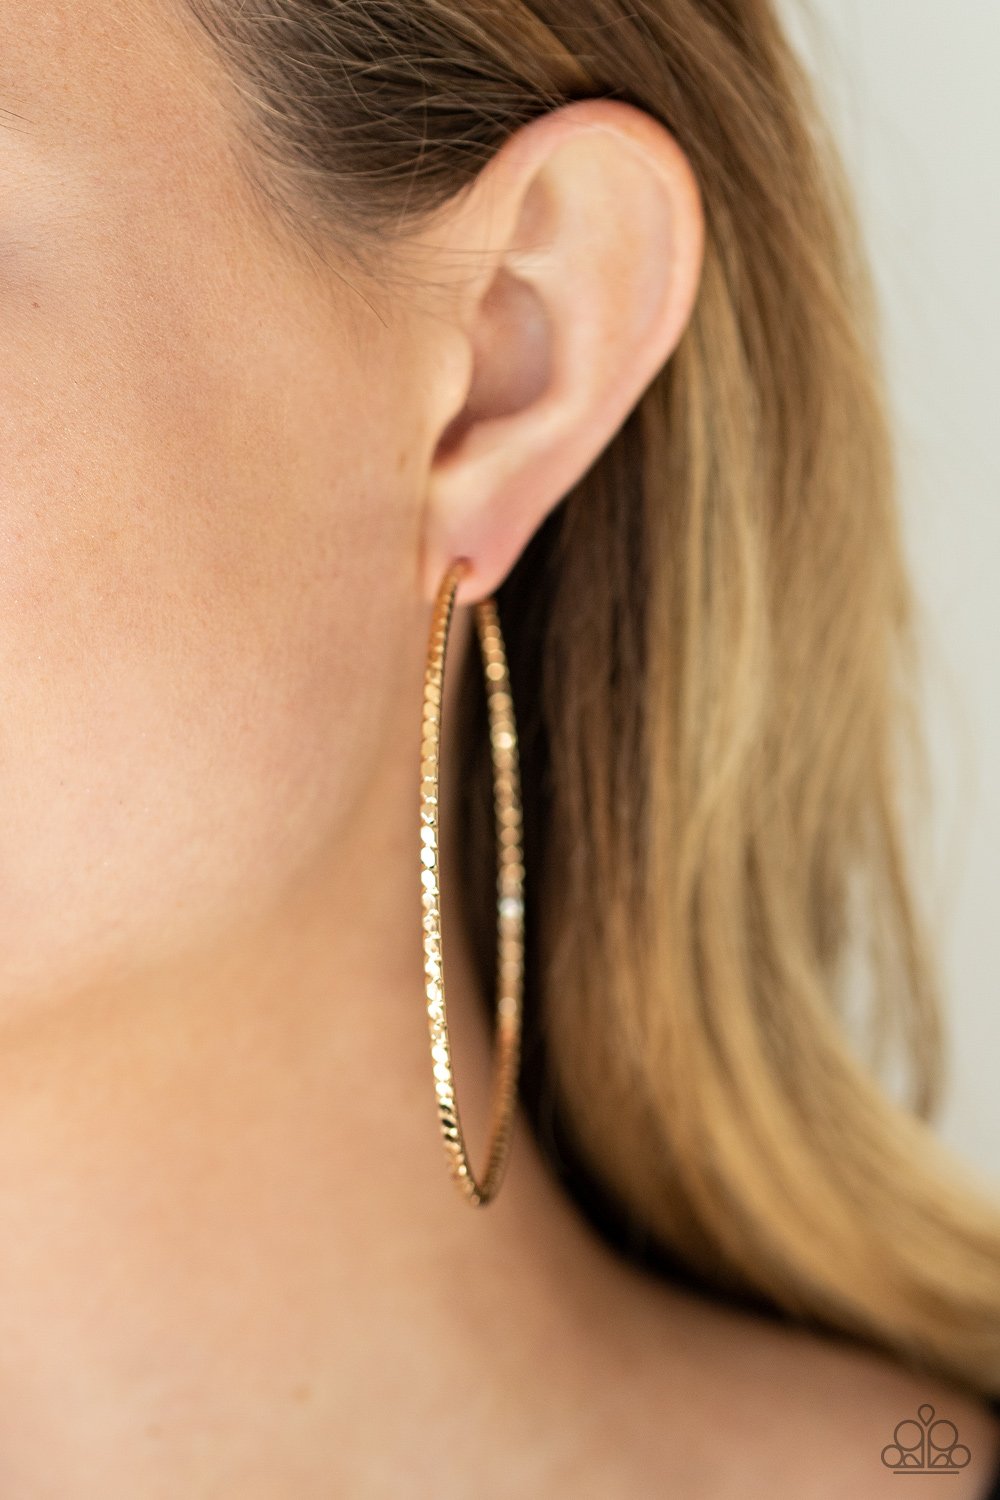 Pump Up The Volume Gold Earrings